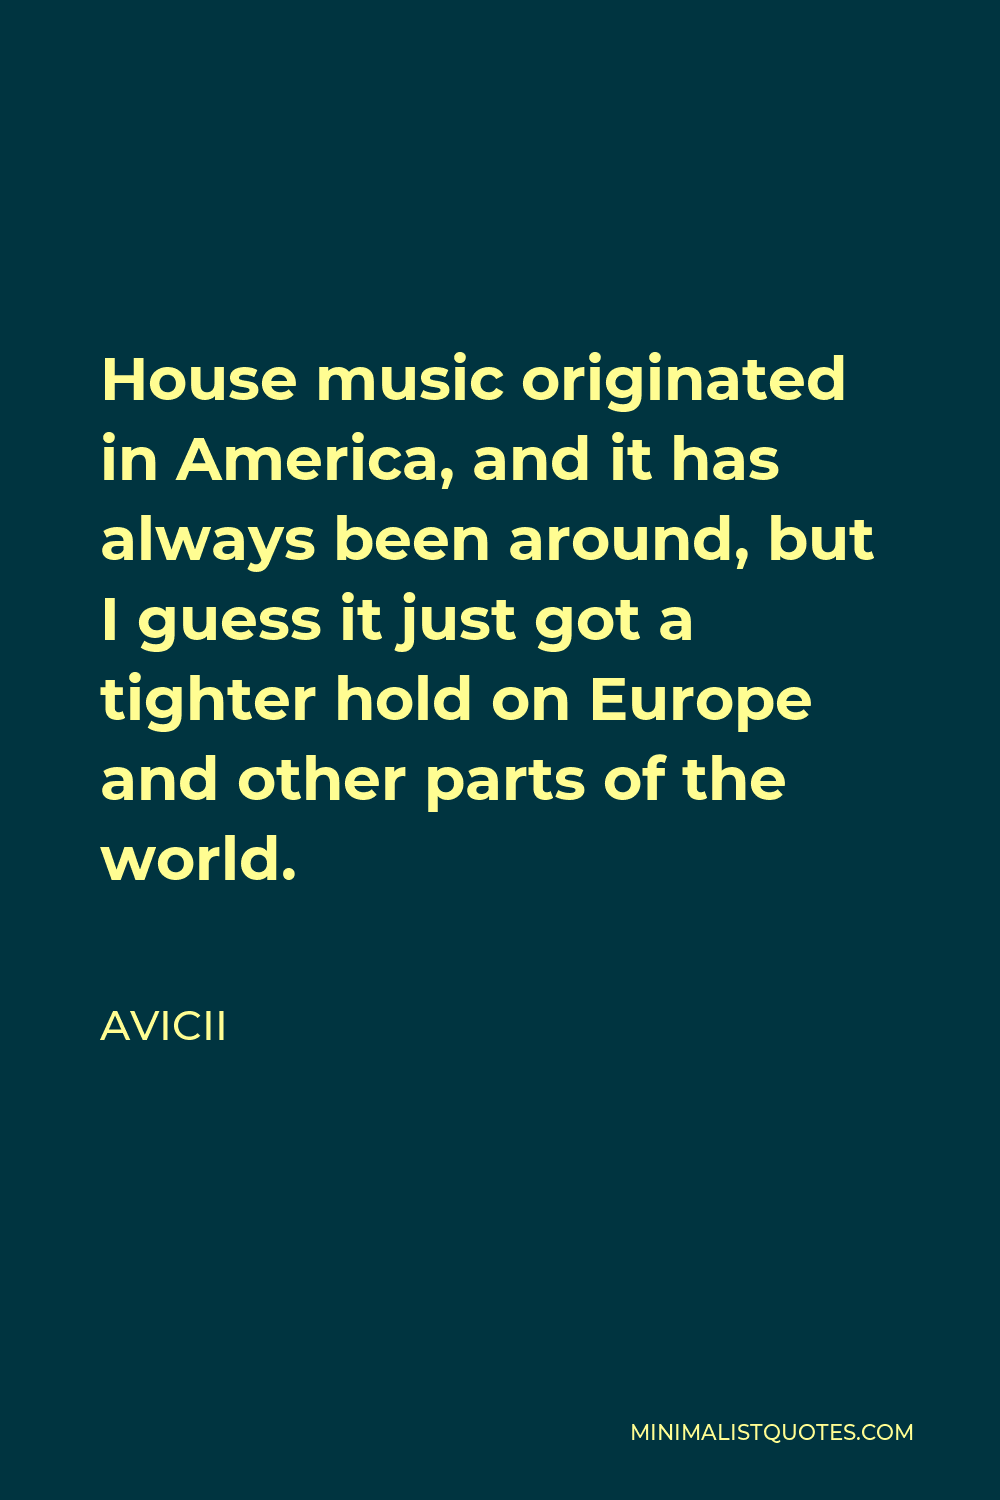 Avicii Quote - House music originated in America, and it has always been around, but I guess it just got a tighter hold on Europe and other parts of the world.